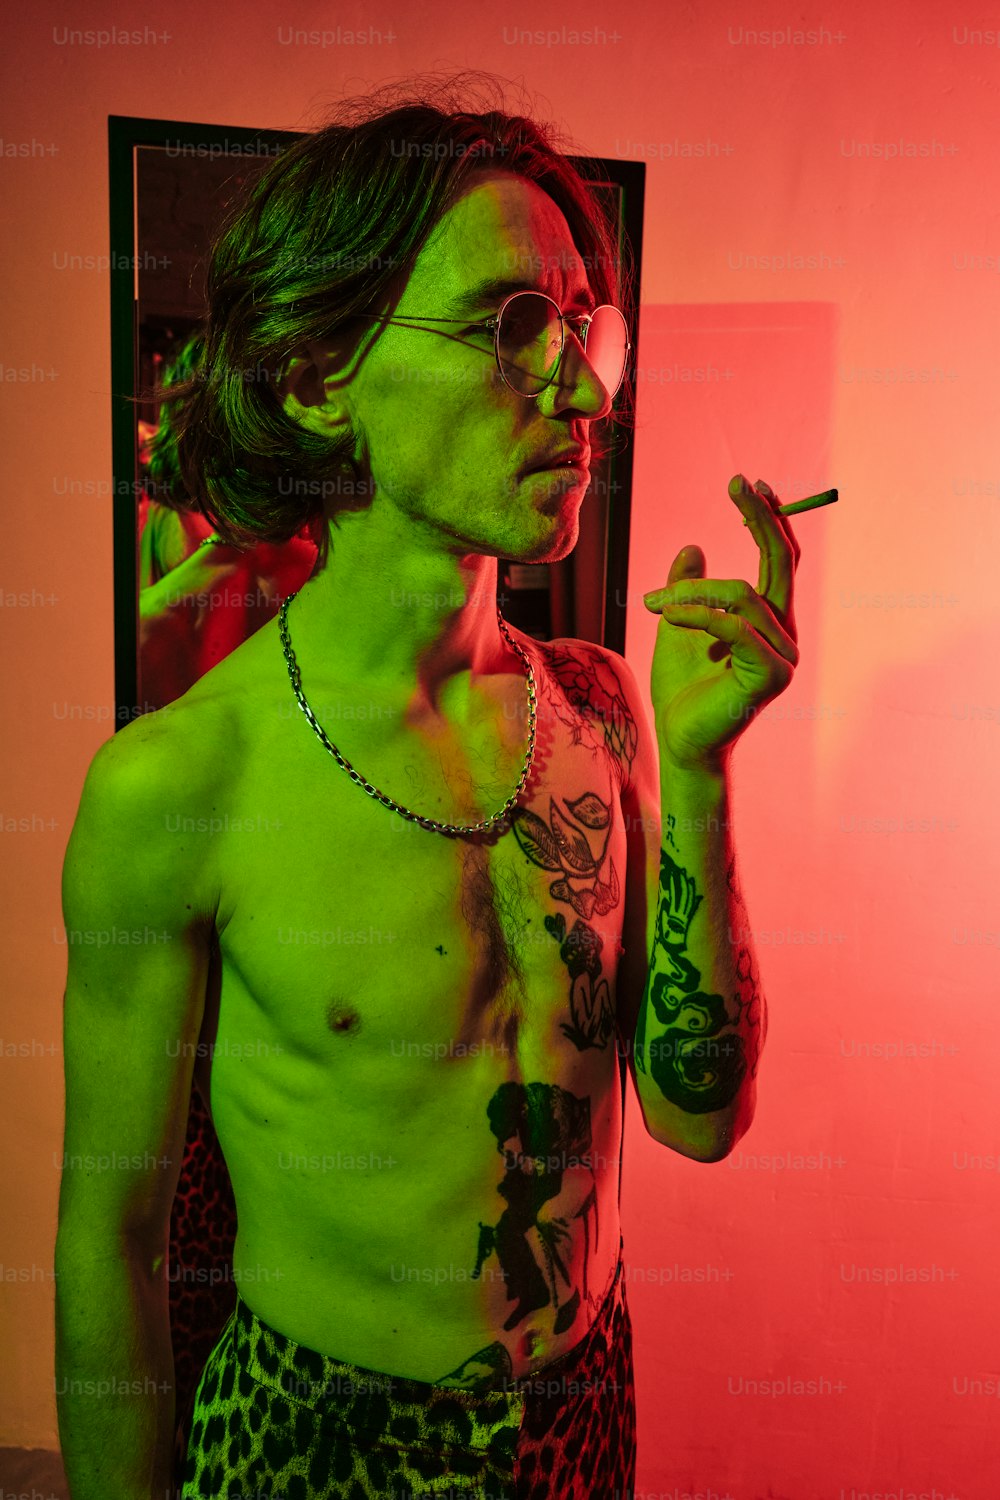 a shirtless man smoking a cigarette in front of a mirror